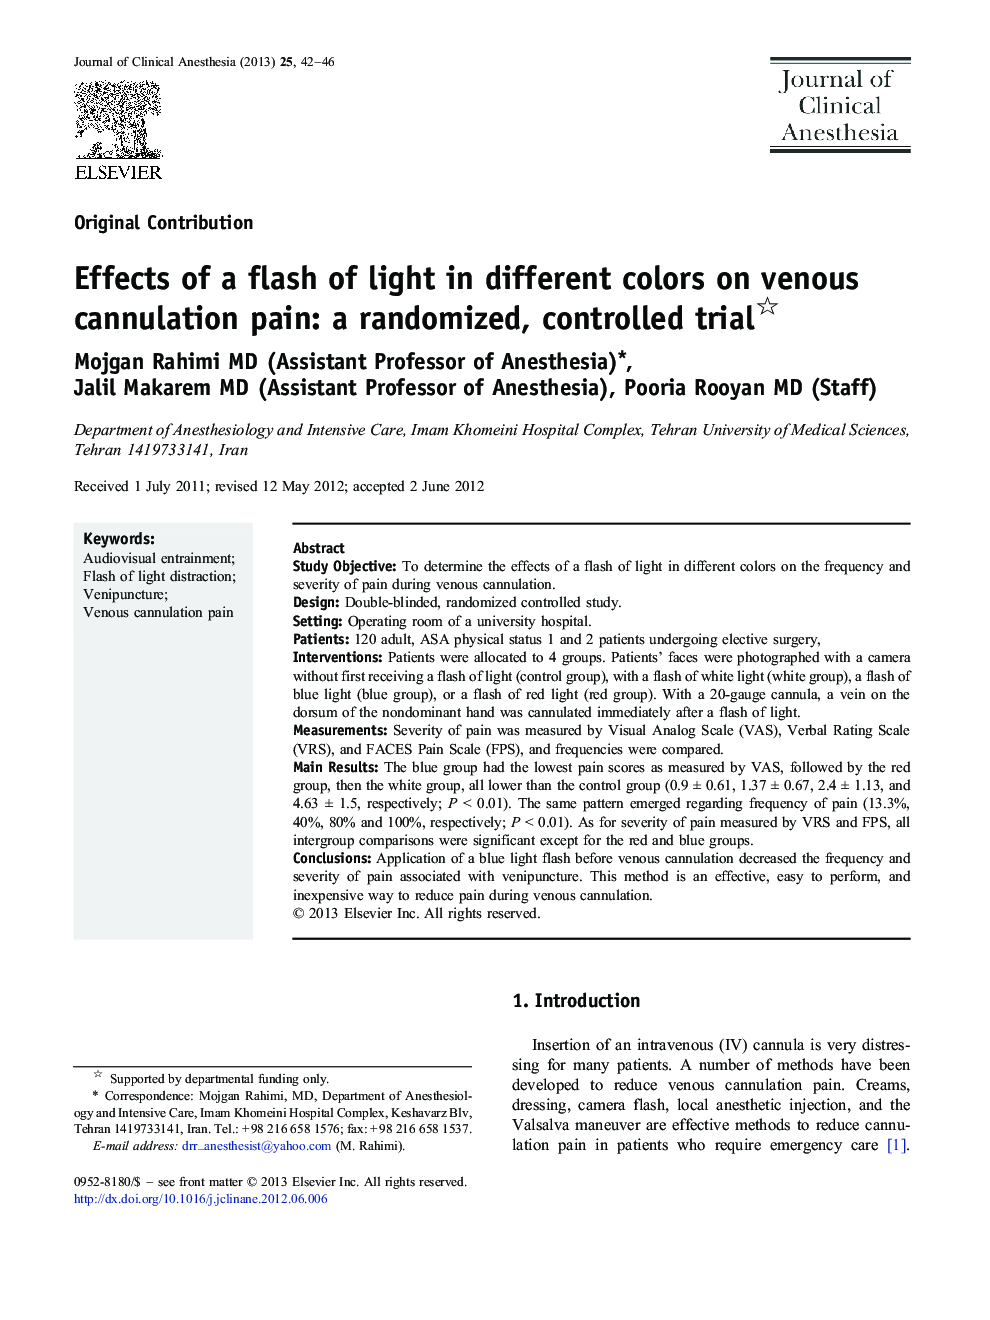 Effects of a flash of light in different colors on venous cannulation pain: a randomized, controlled trial 